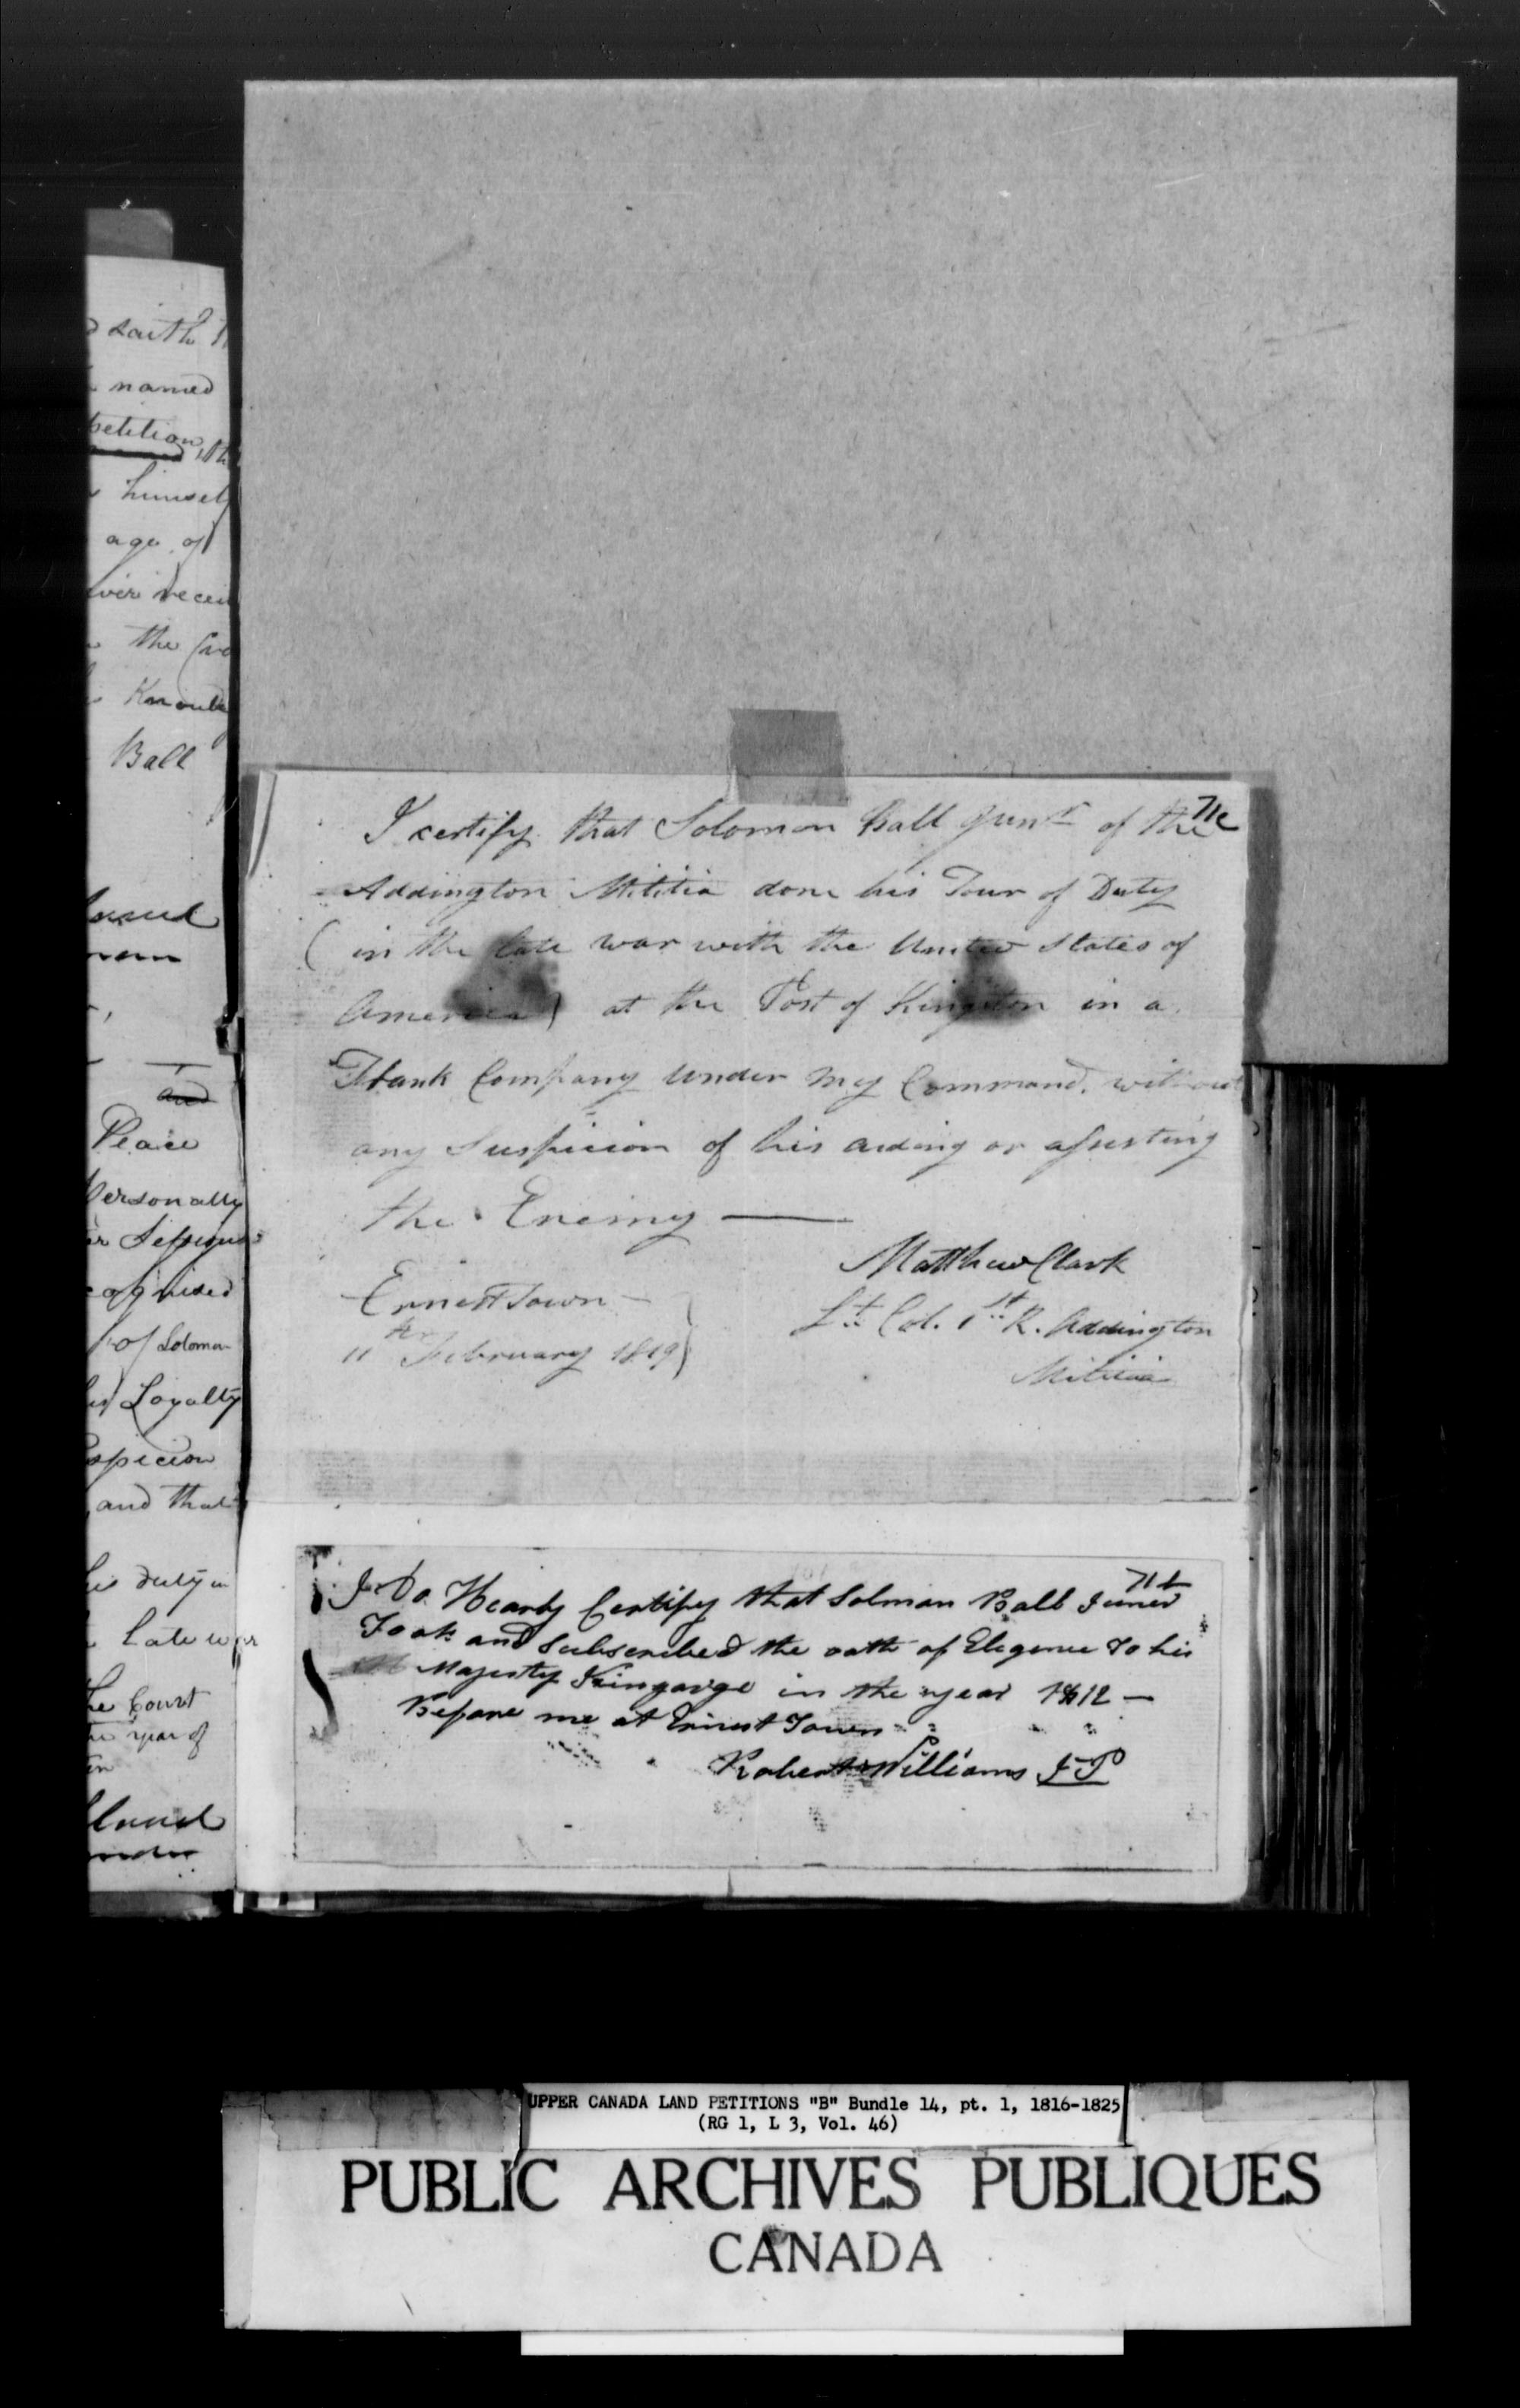 Title: Upper Canada Land Petitions (1763-1865) - Mikan Number: 205131 - Microform: c-1627